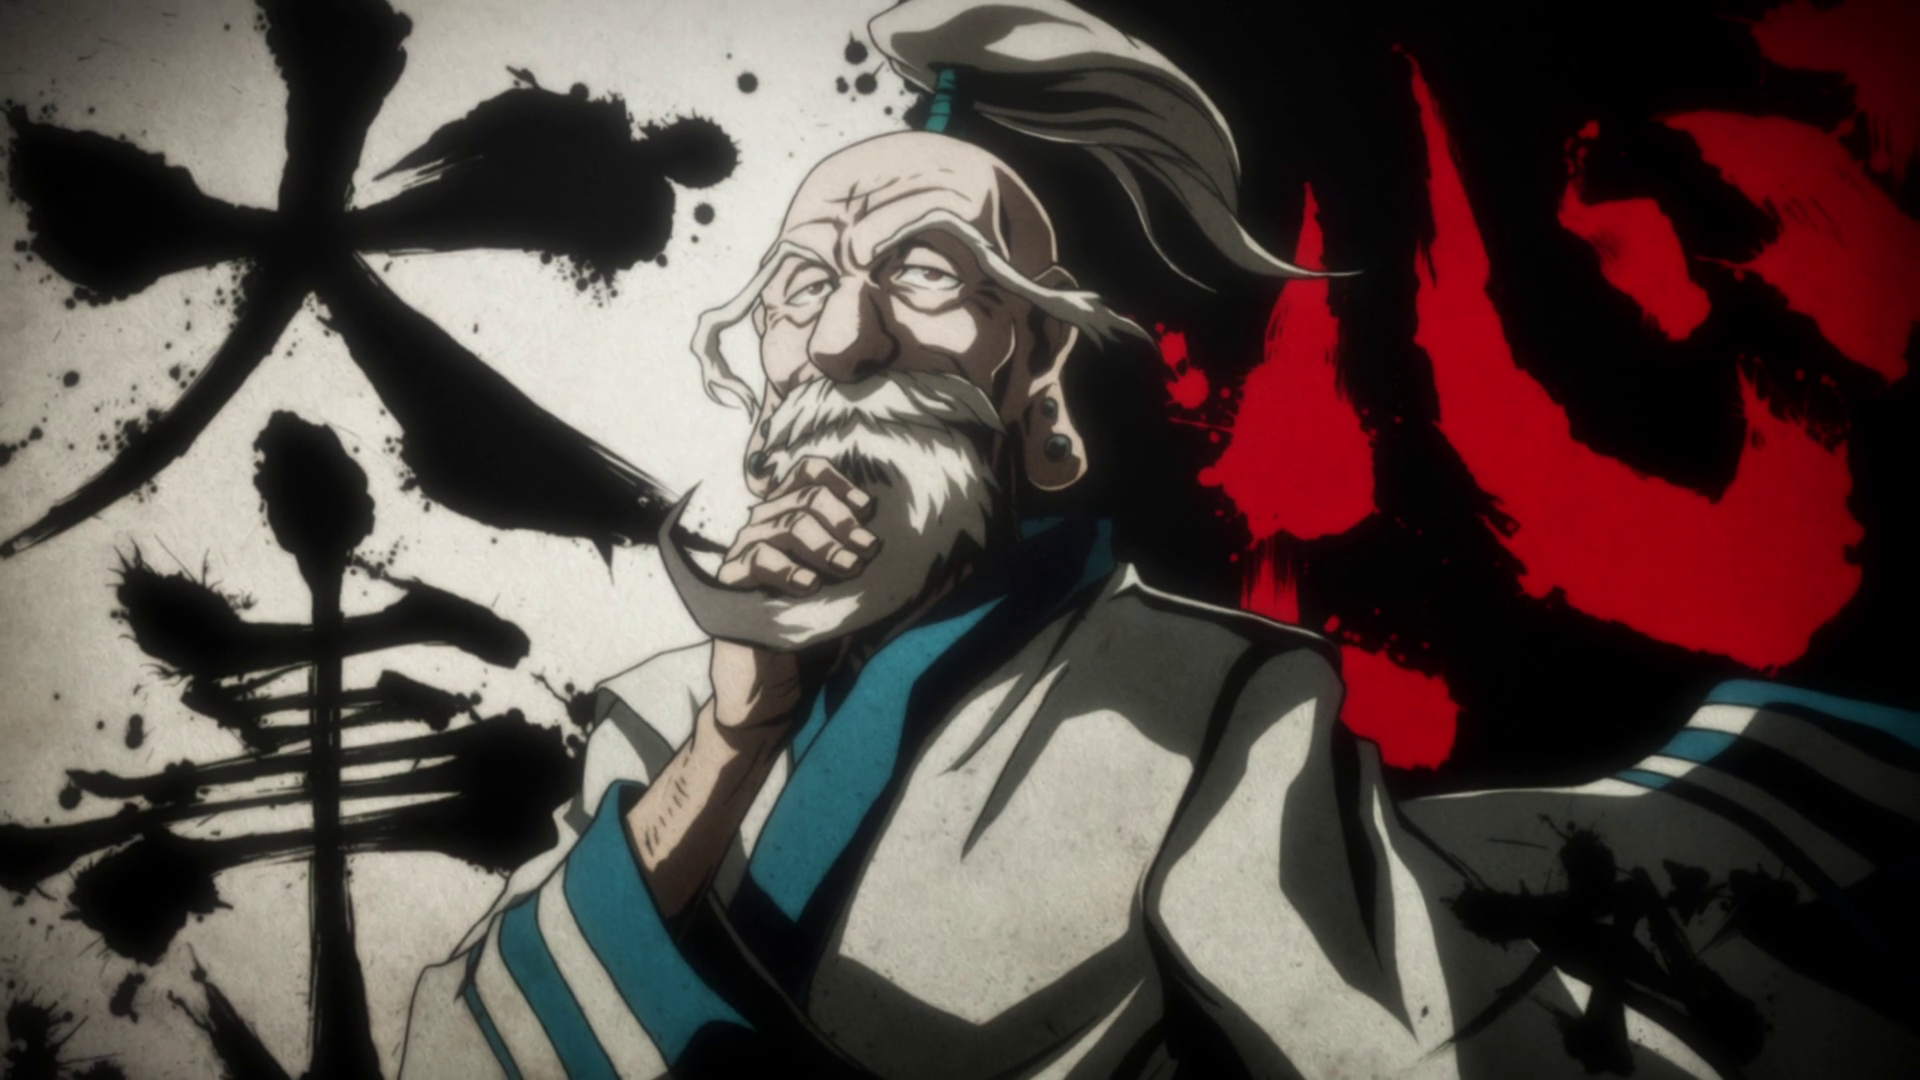 Netero is Overpowered Anime Character from Hunter x Hunter